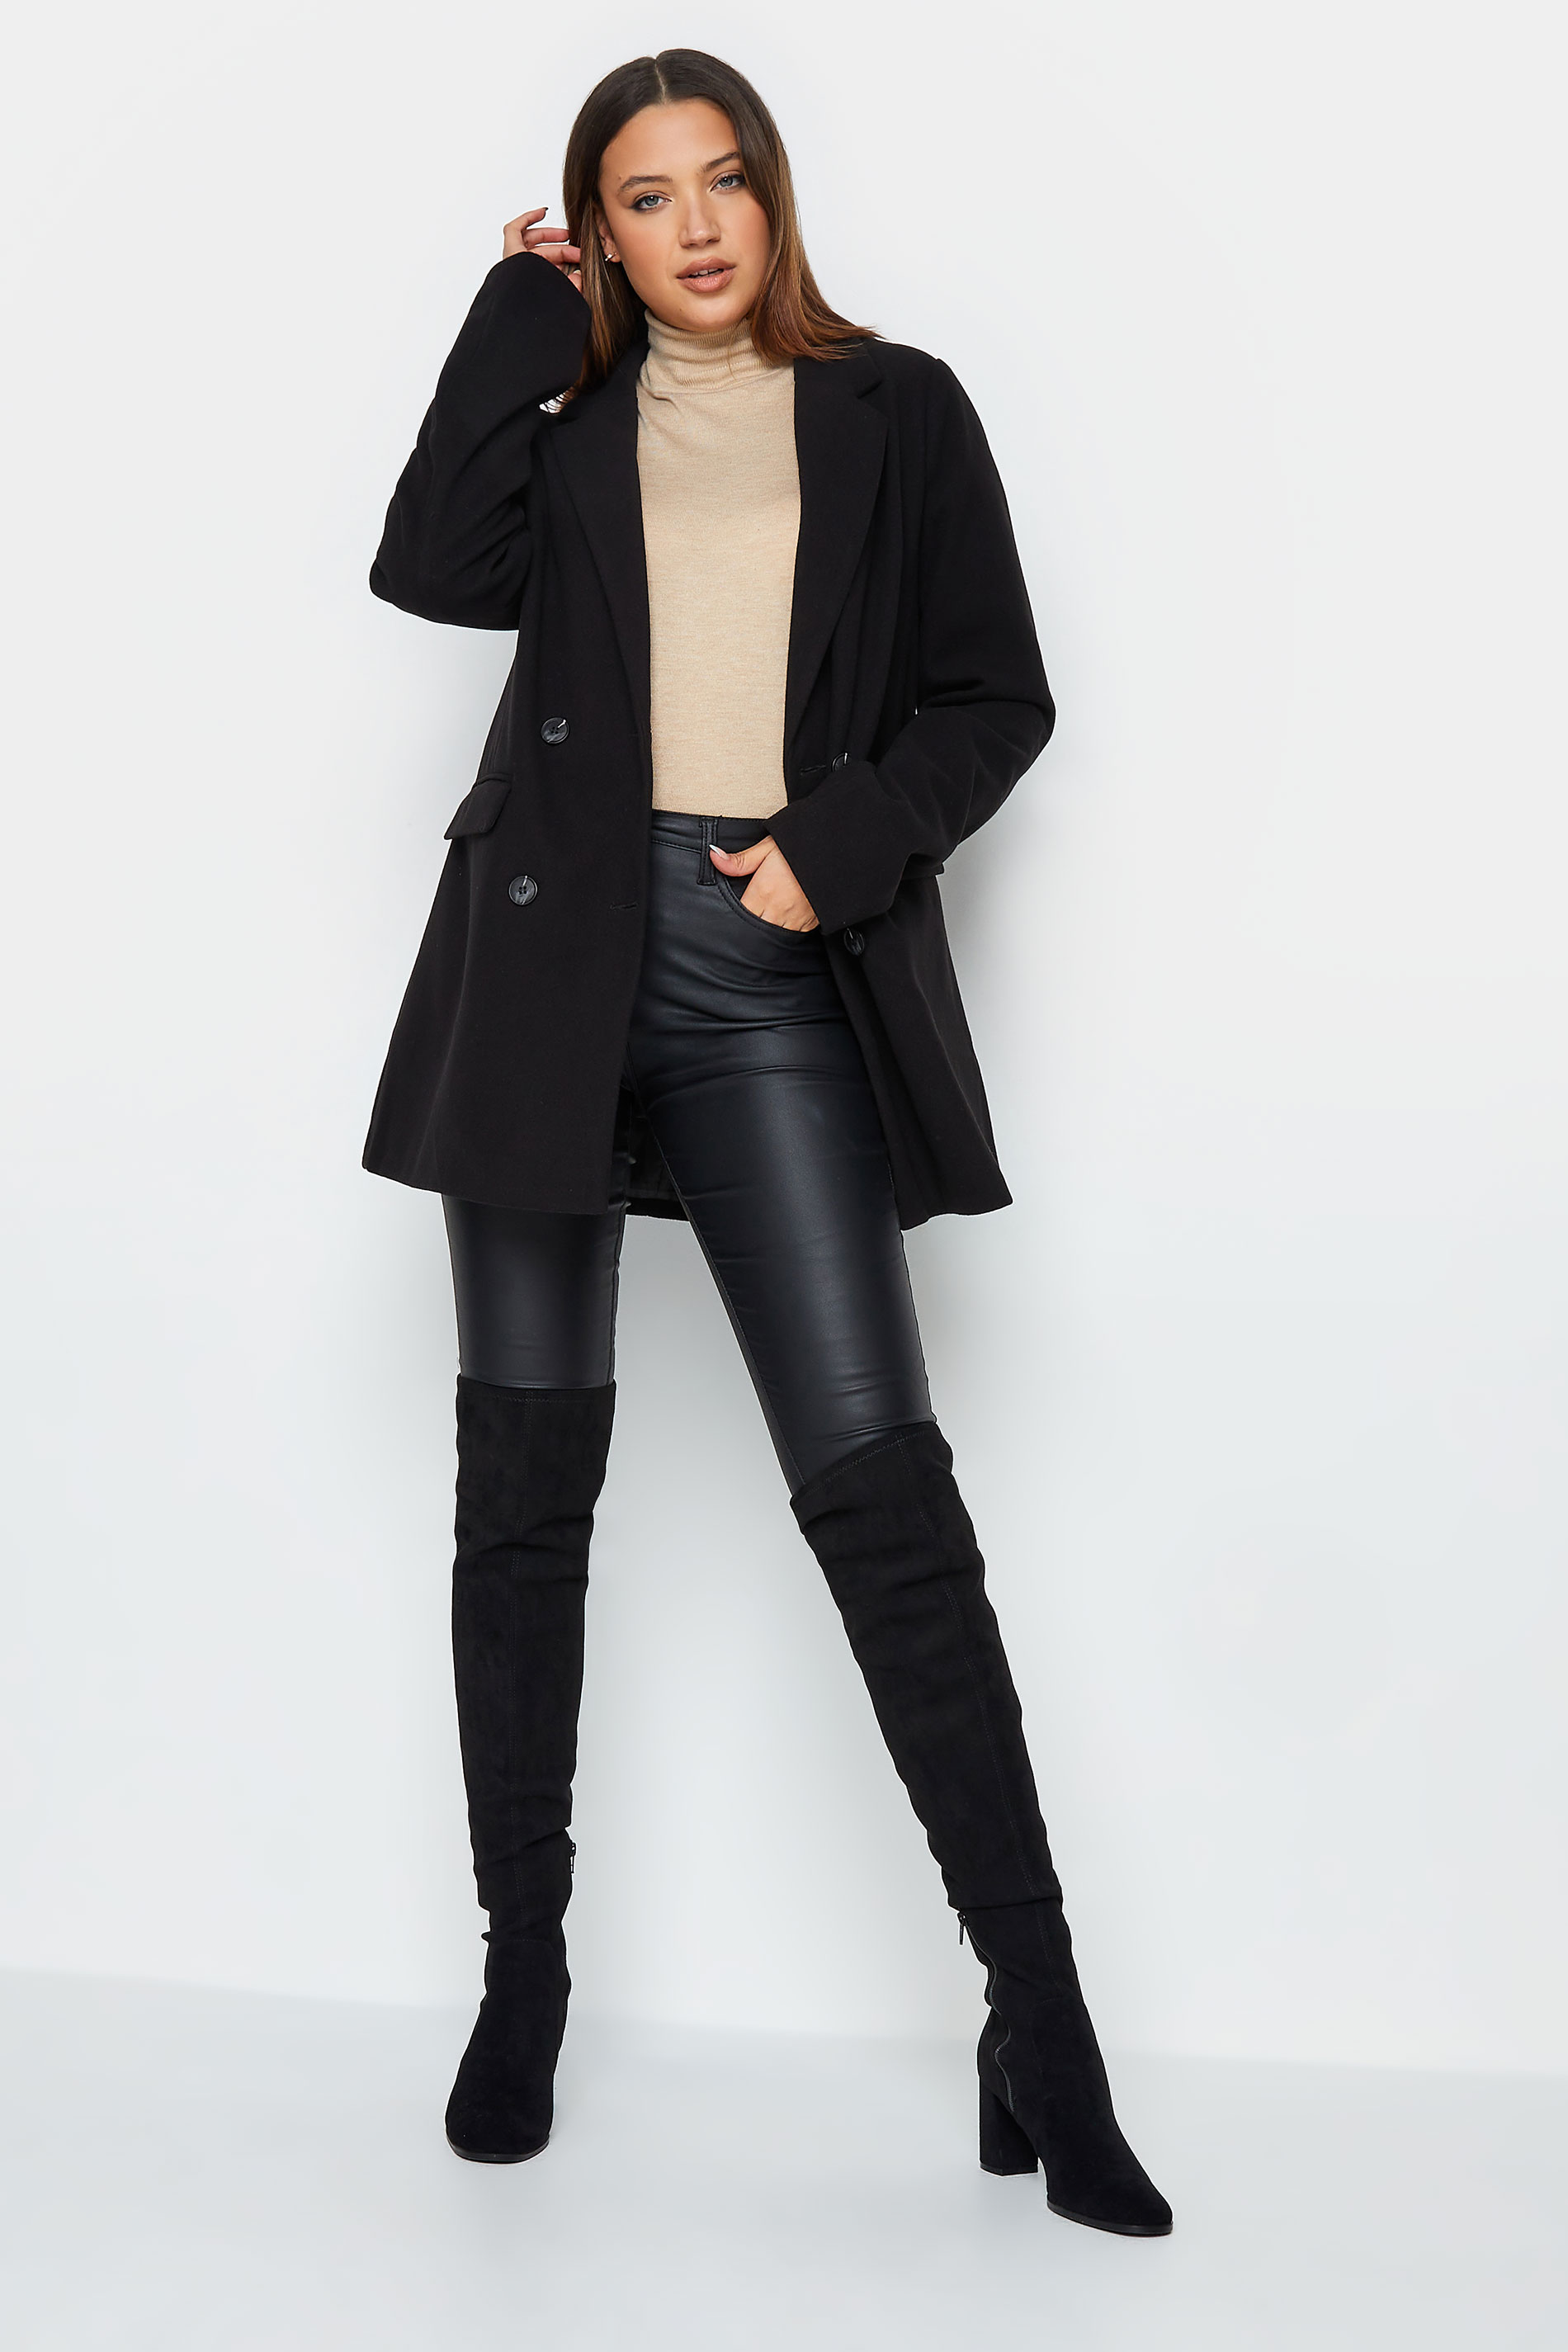 LTS Tall Women's Black Double Breasted Brushed Jacket | Long Tall Sally 2